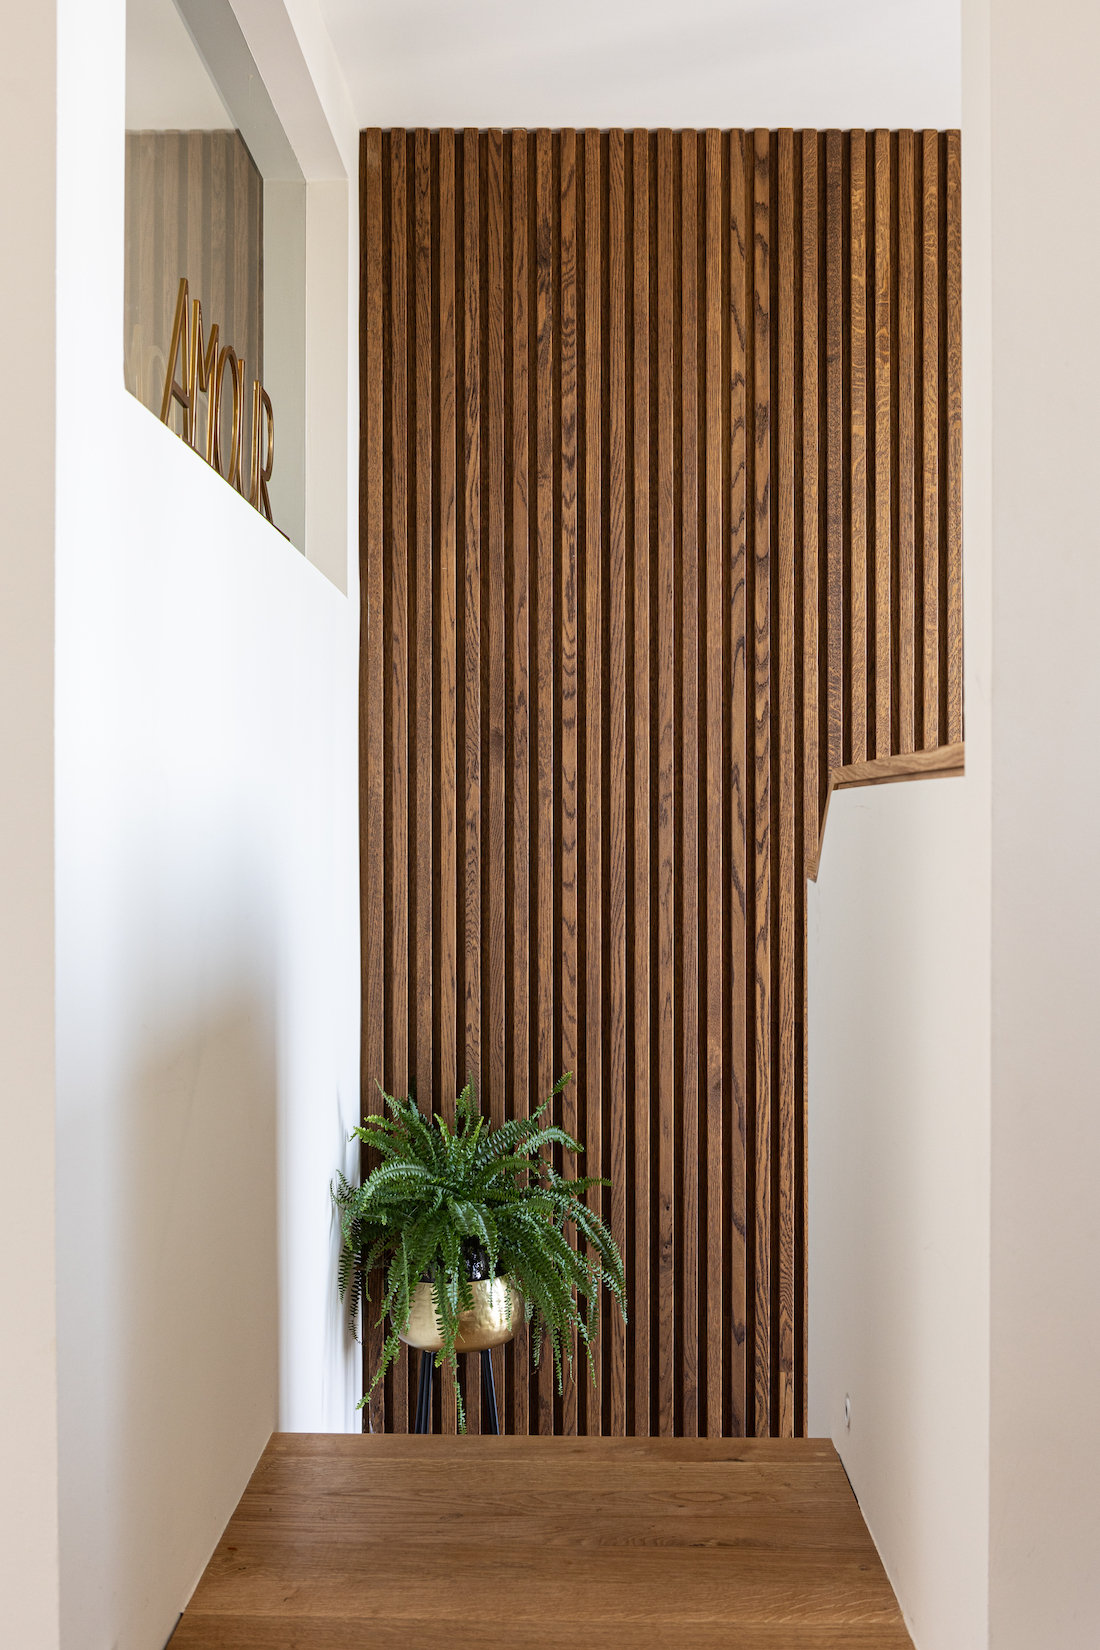 bespoke joinery panelling in hallway of our mid century modern beach house